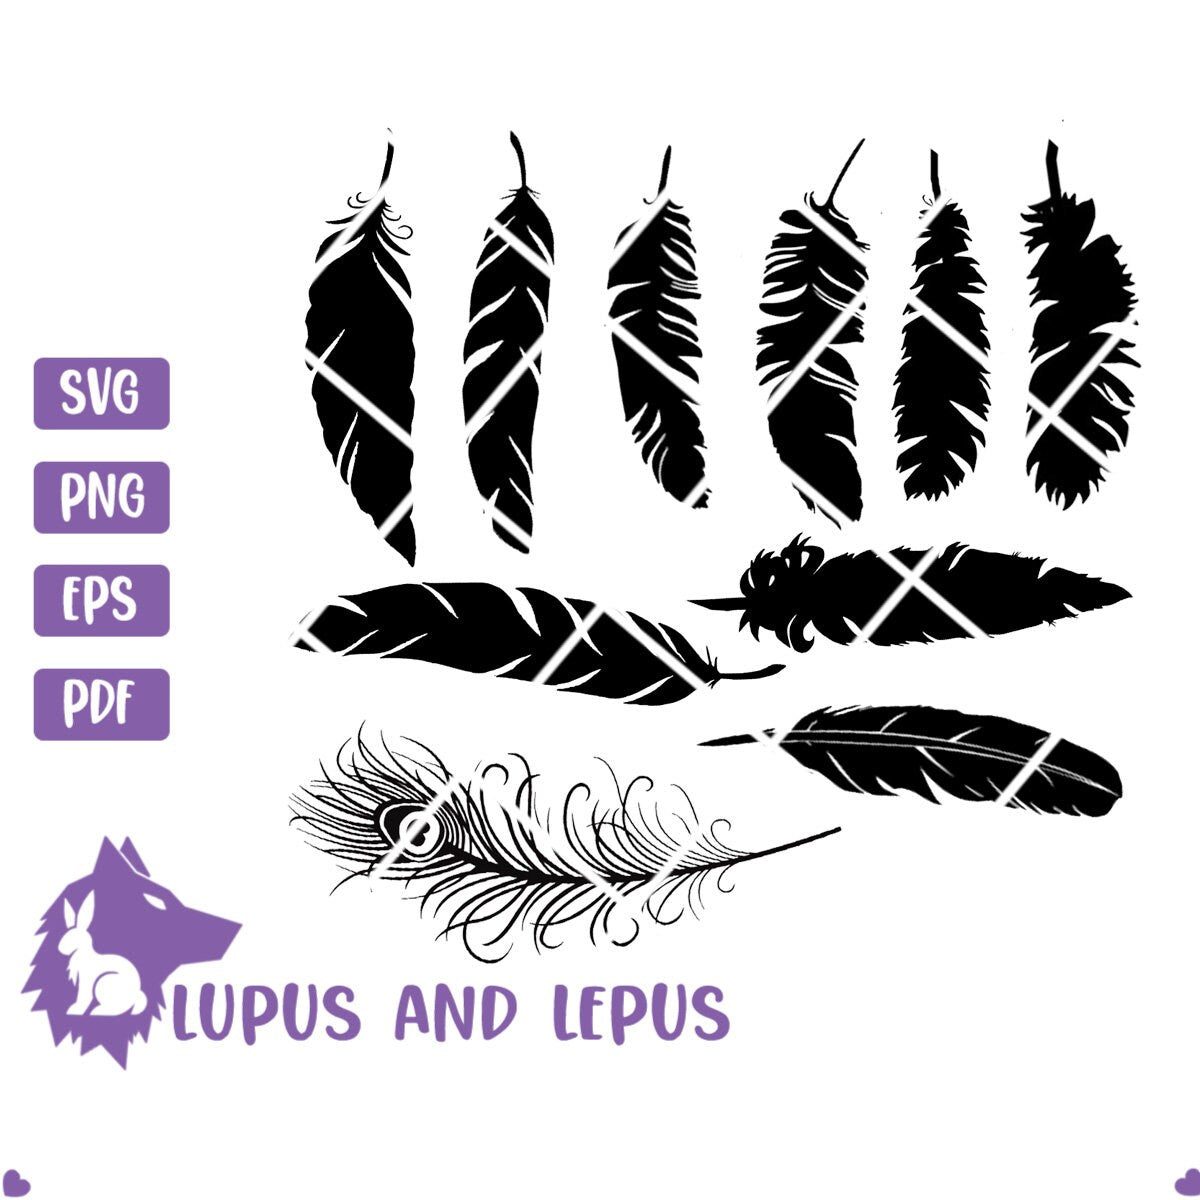 Digital File - feathers svg, feather svg, Native American svg, boho svg, feather vector, feather ClipArt (eps, svg, pdf, png, jpeg)